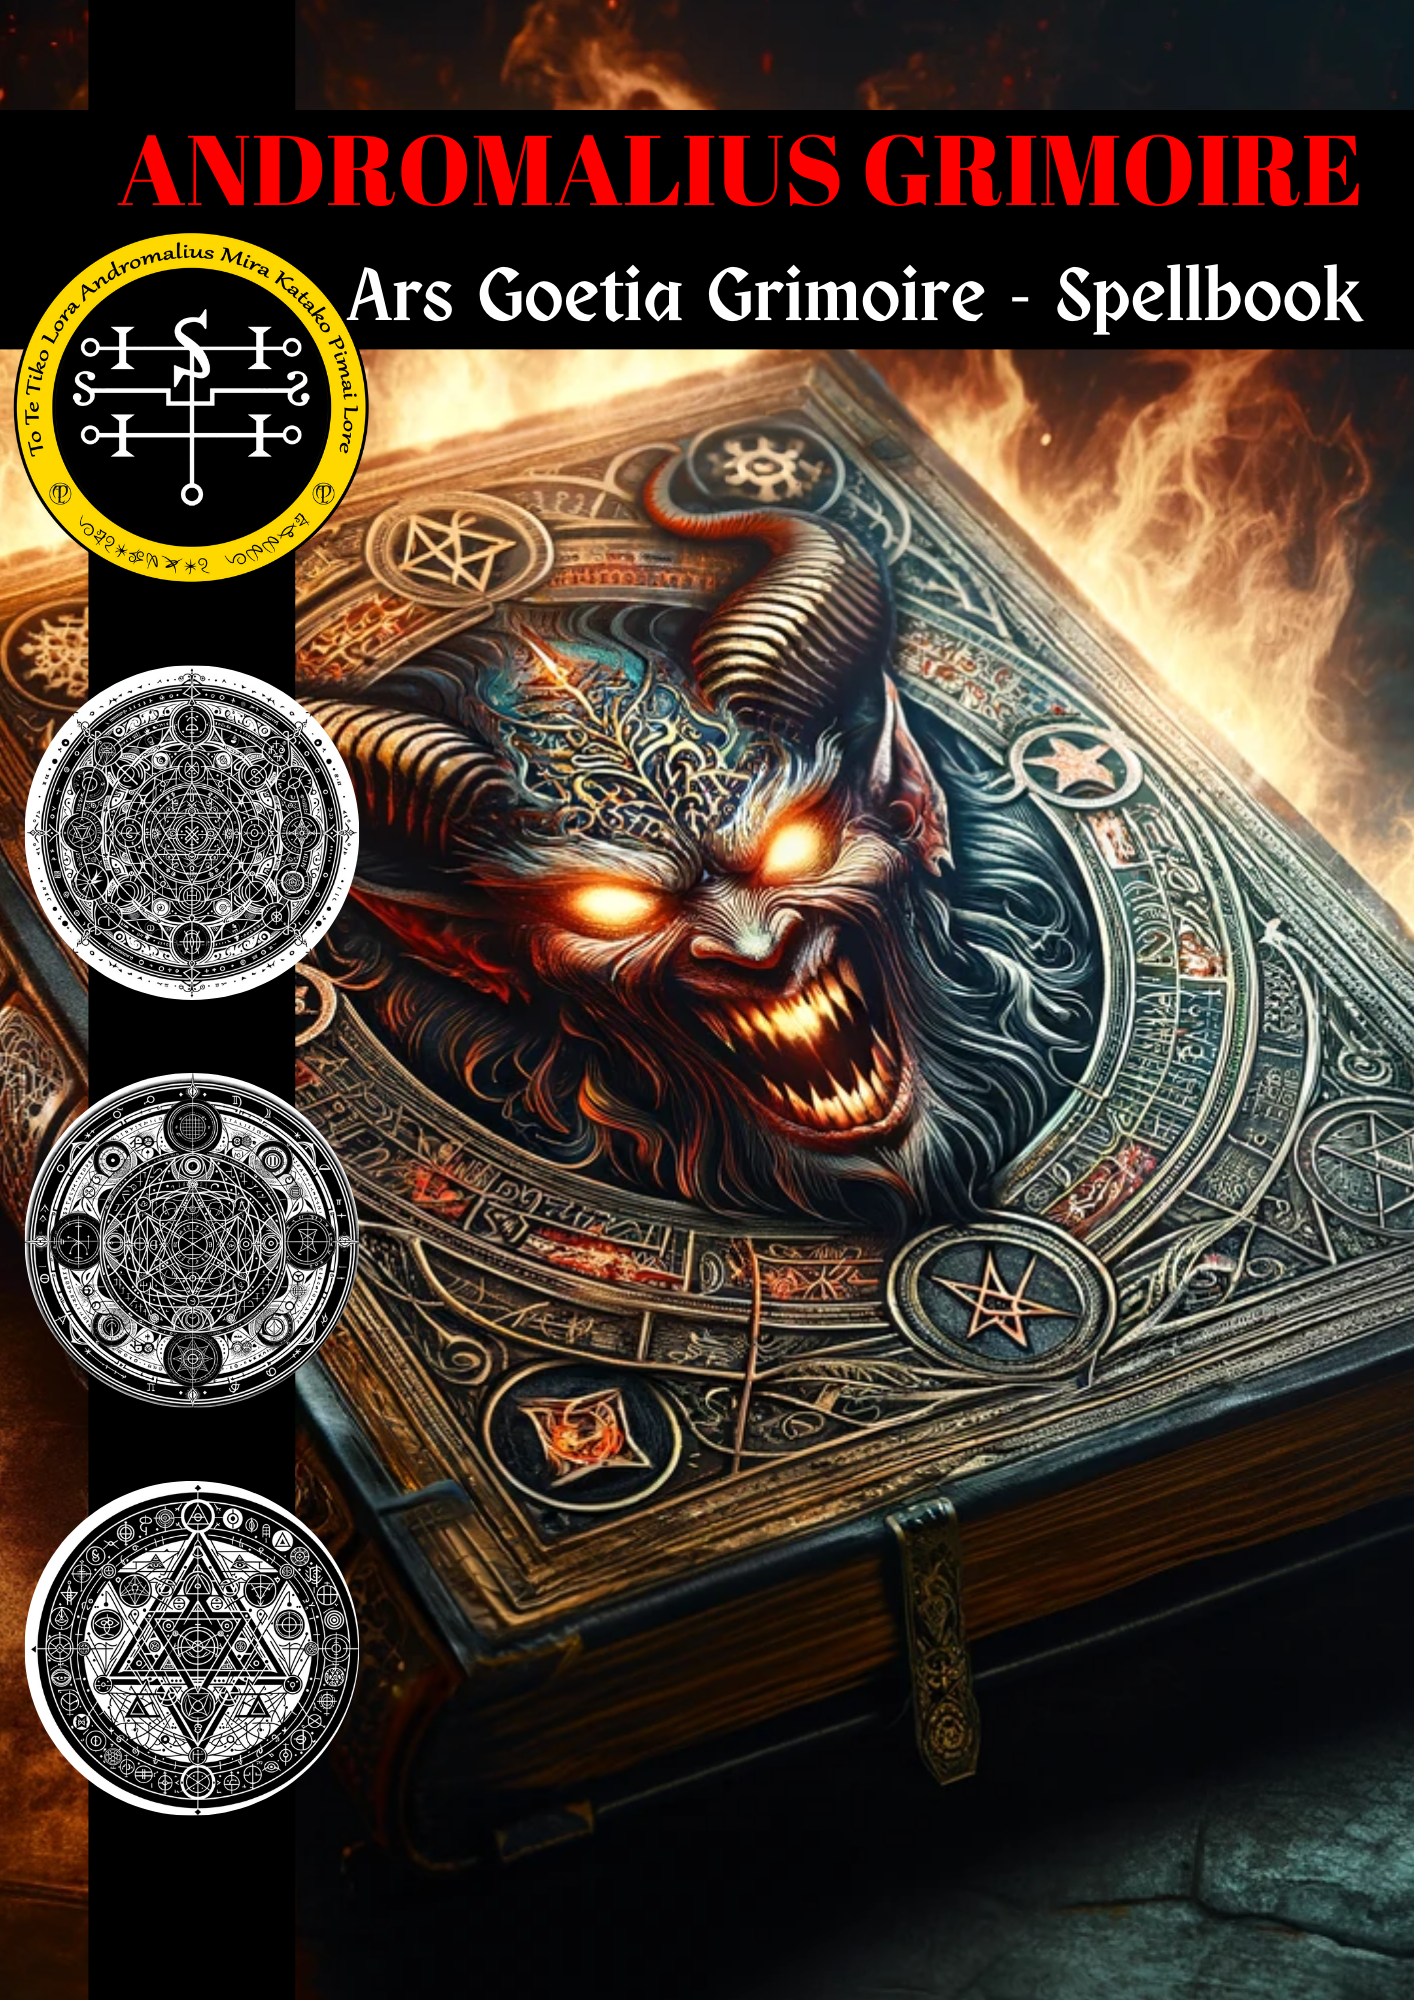 Grimoire of ANDROMALIUS Spells & Rituals for protection and to Empower Yourself - Abraxas Amulets ® Magic ♾️ Talismans ♾️ Kohungahunga